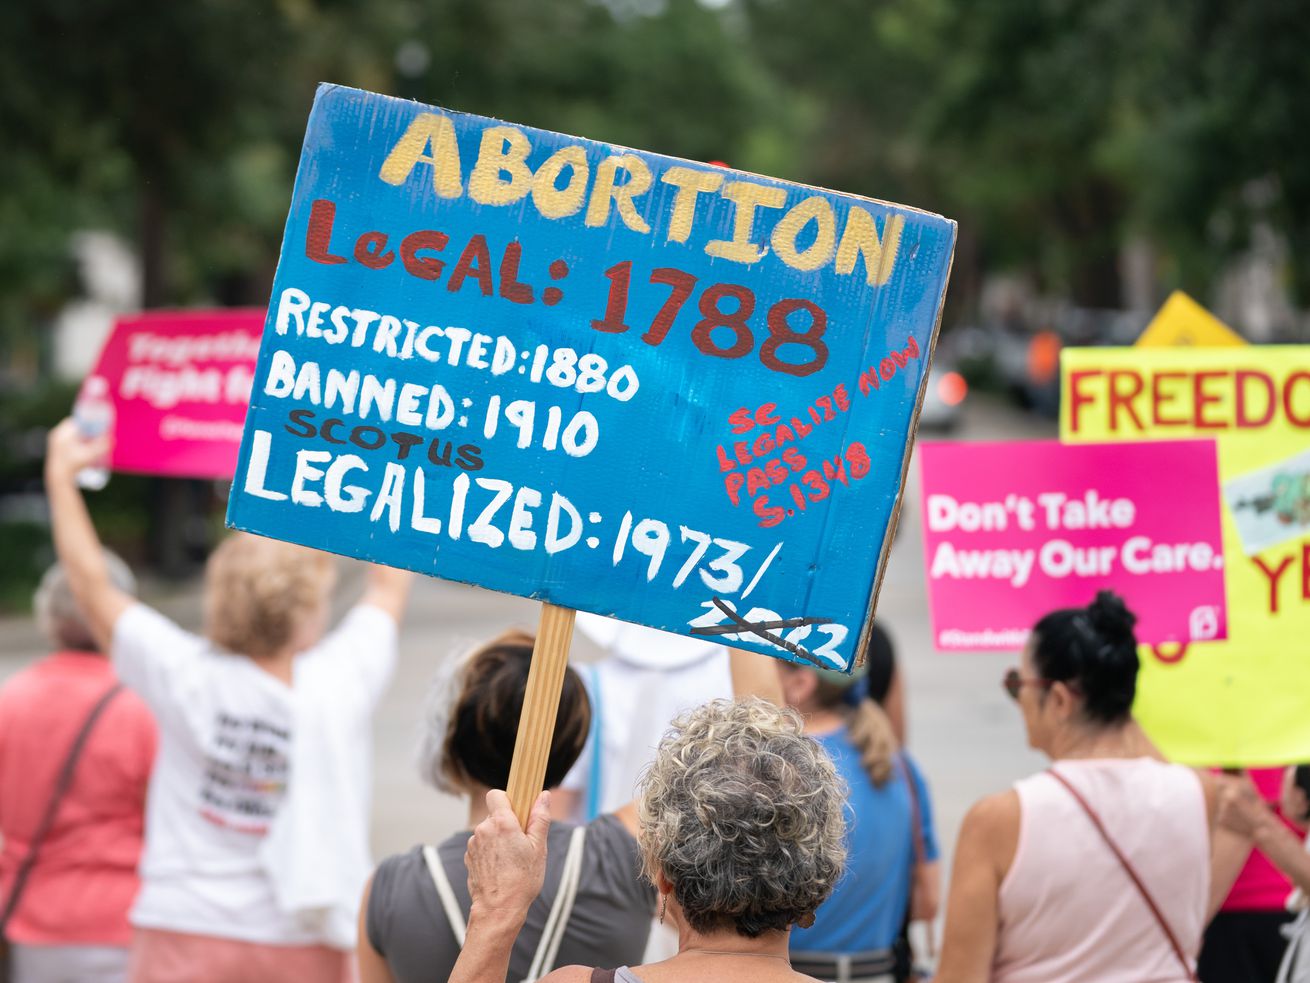 Protesters hold signs in front of the South Carolina Statehouse. Handpainted words on a large blue sign say: Abortion, legal: 1788, restricted: 1880, banned: 1910, legalized: 1973, with the year 2020 crossed out in black paint.